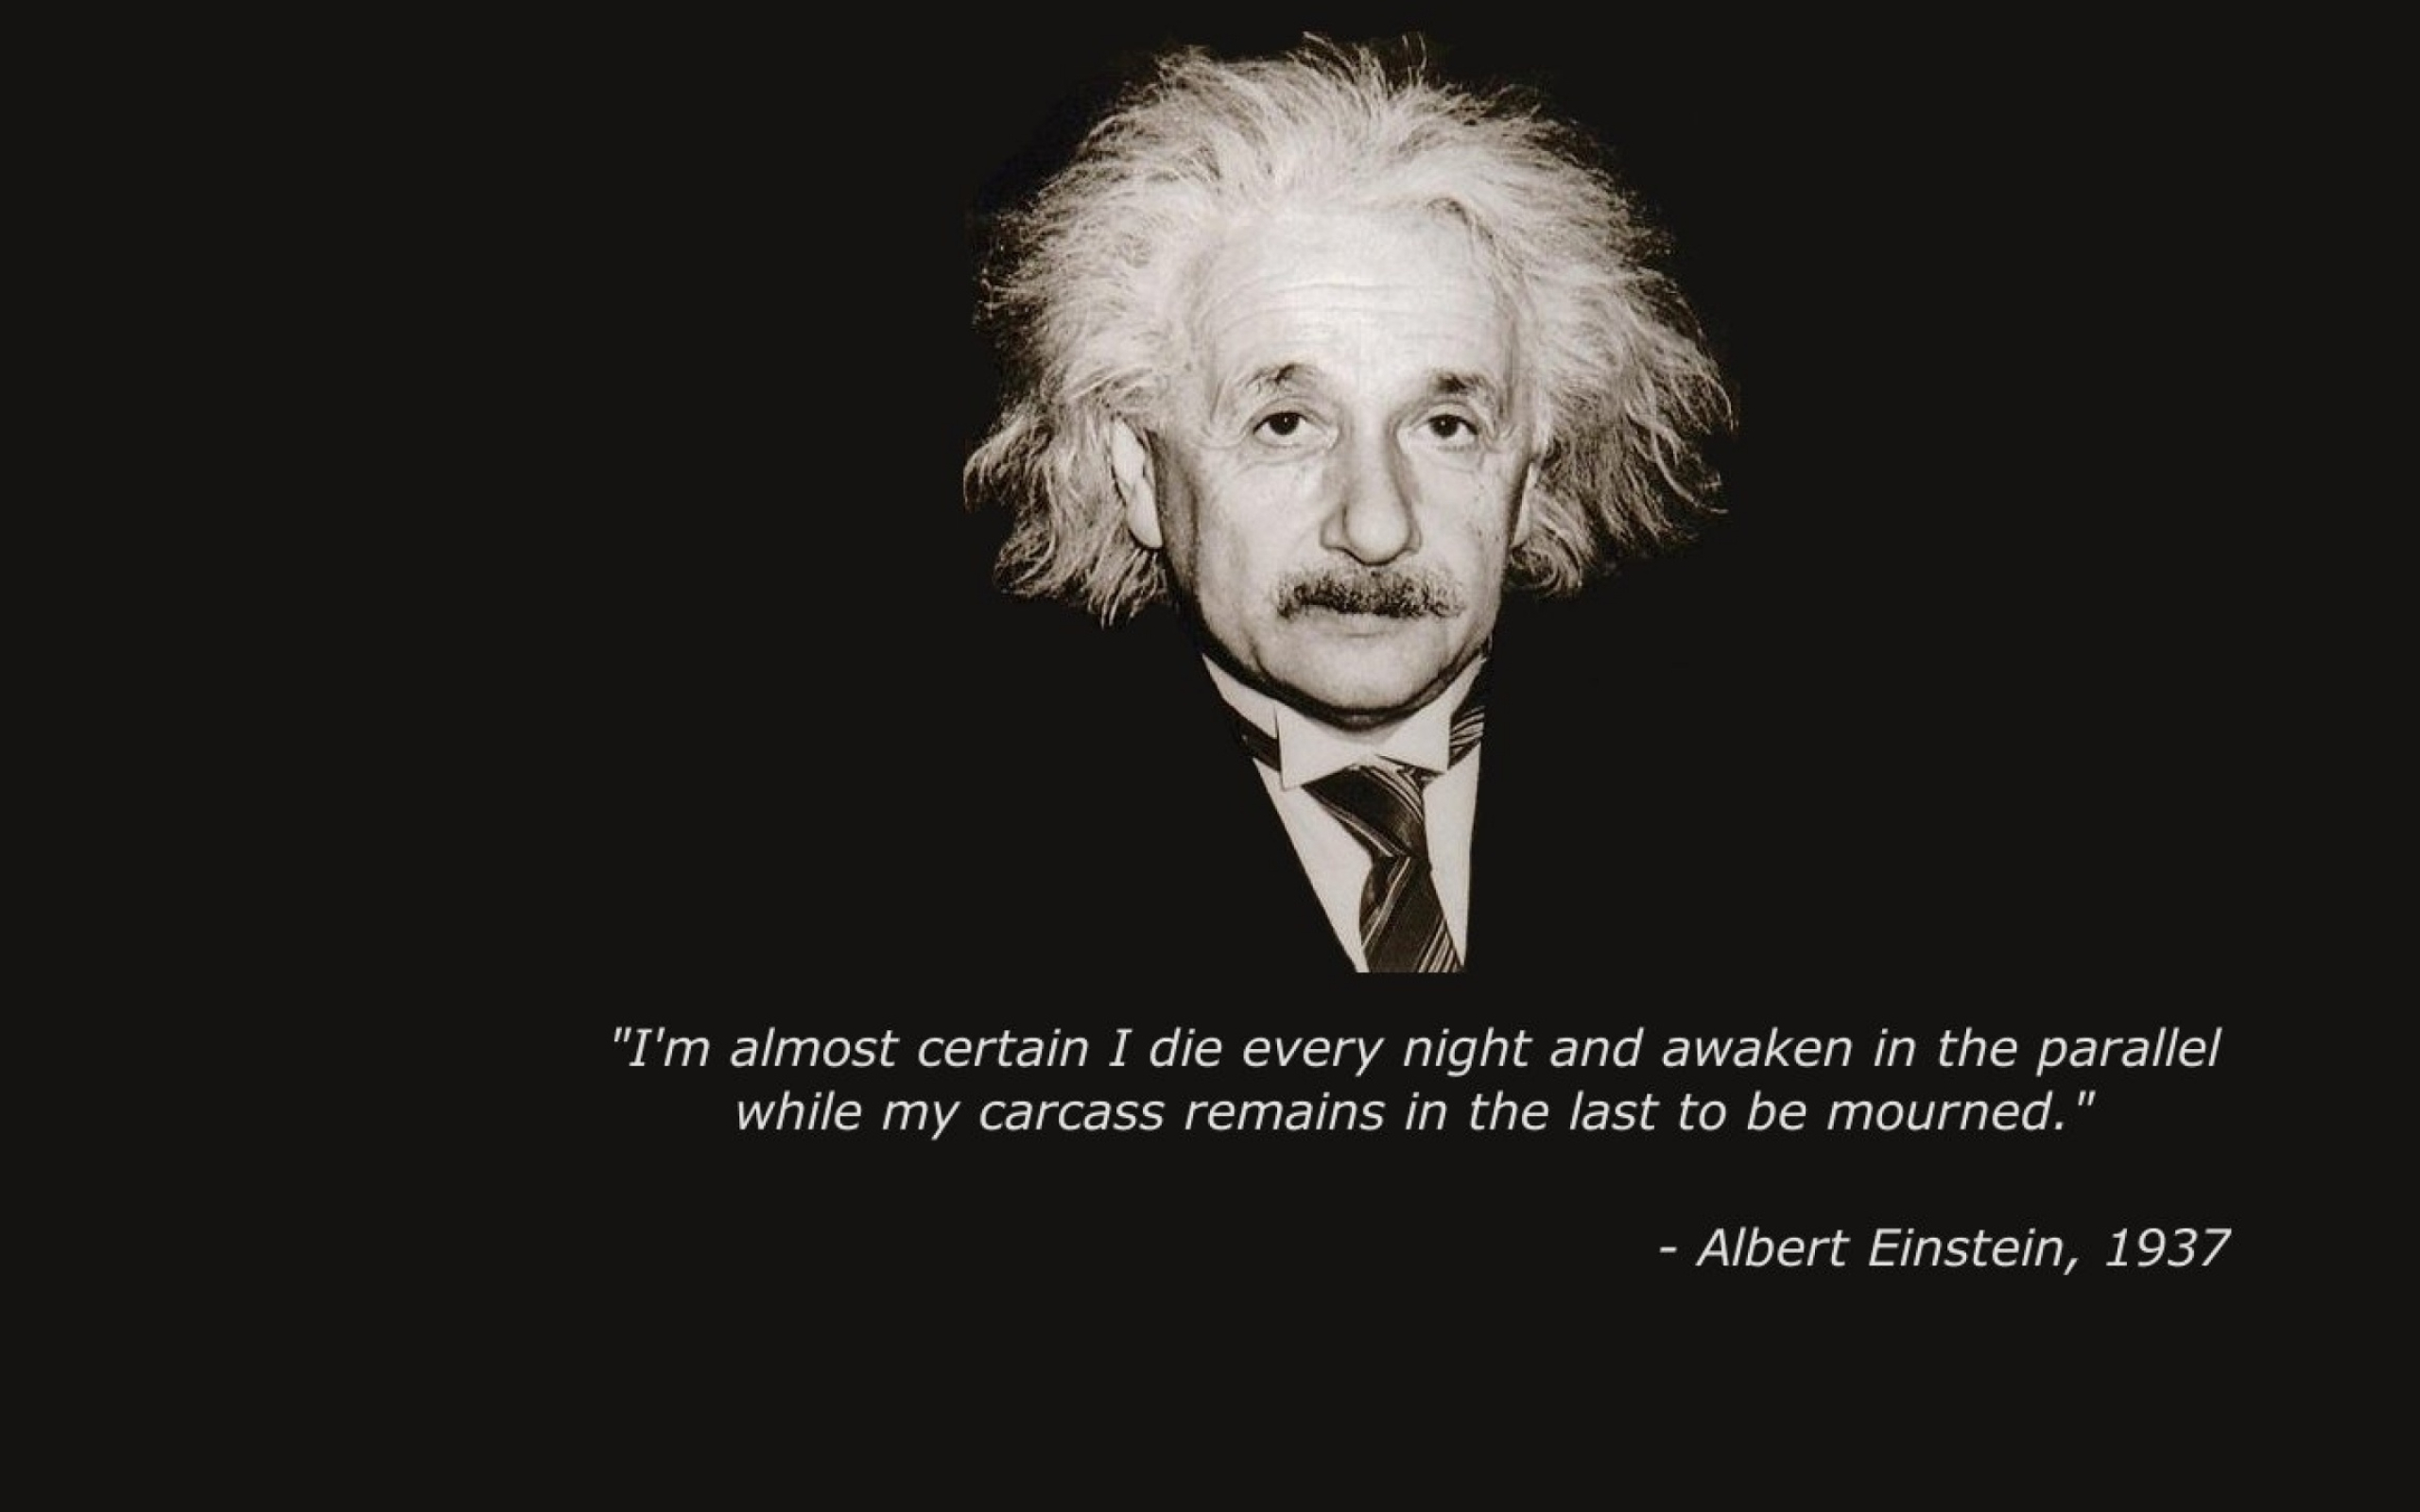 Einstein: Made important contributions to the development of the theory of quantum mechanics. 2560x1600 HD Background.